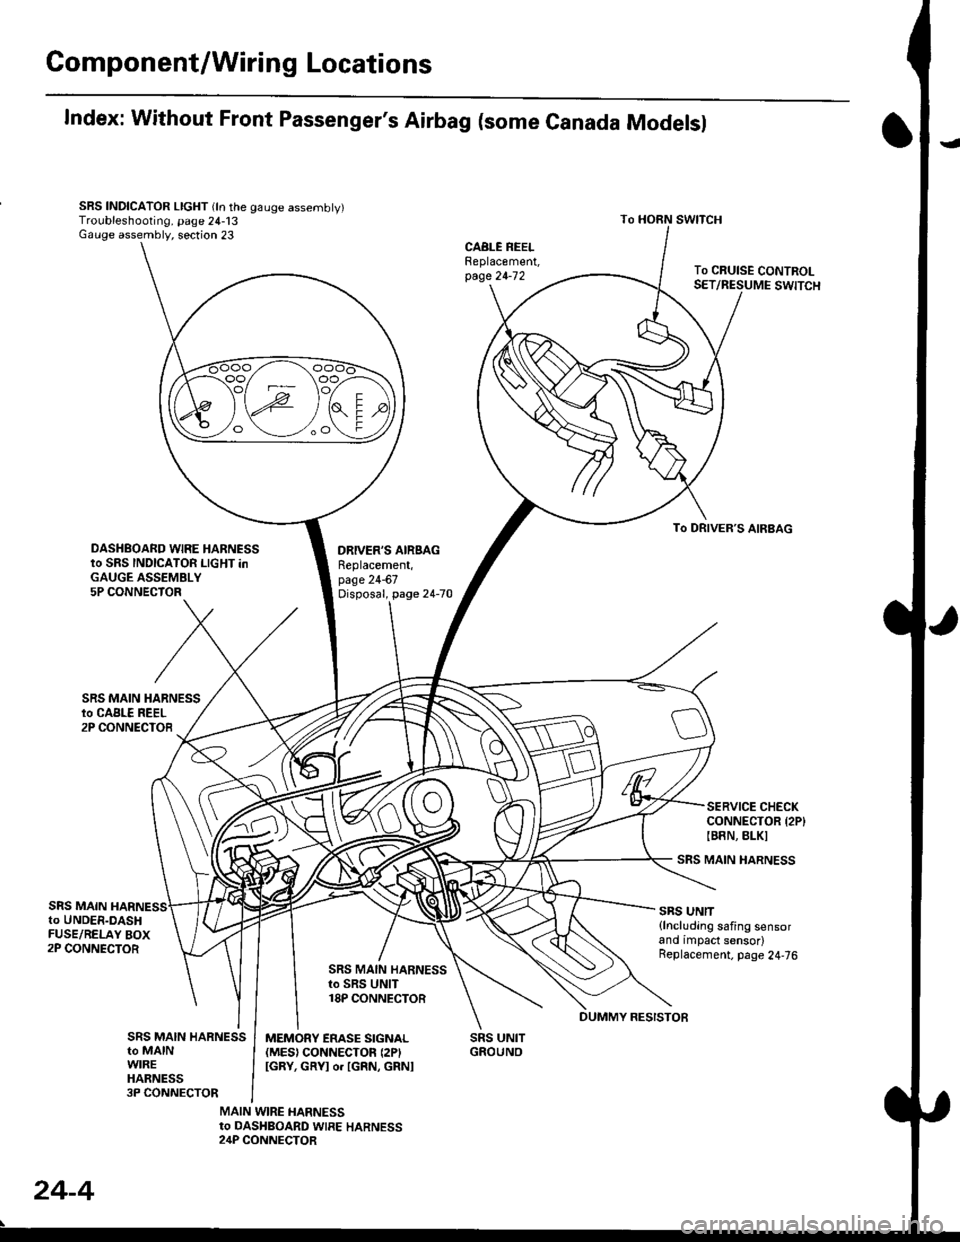 HONDA CIVIC 1997 6.G Workshop Manual Gomponent/Wiring Locations
Index: Without Front Passengers Airbag (some Canada Modelsl
SRS INDICATOR LIGHT (ln the gauge assembly)Troubleshooting, page 24-13Gauge assembly, section 23
DRIVERS AIRSAG